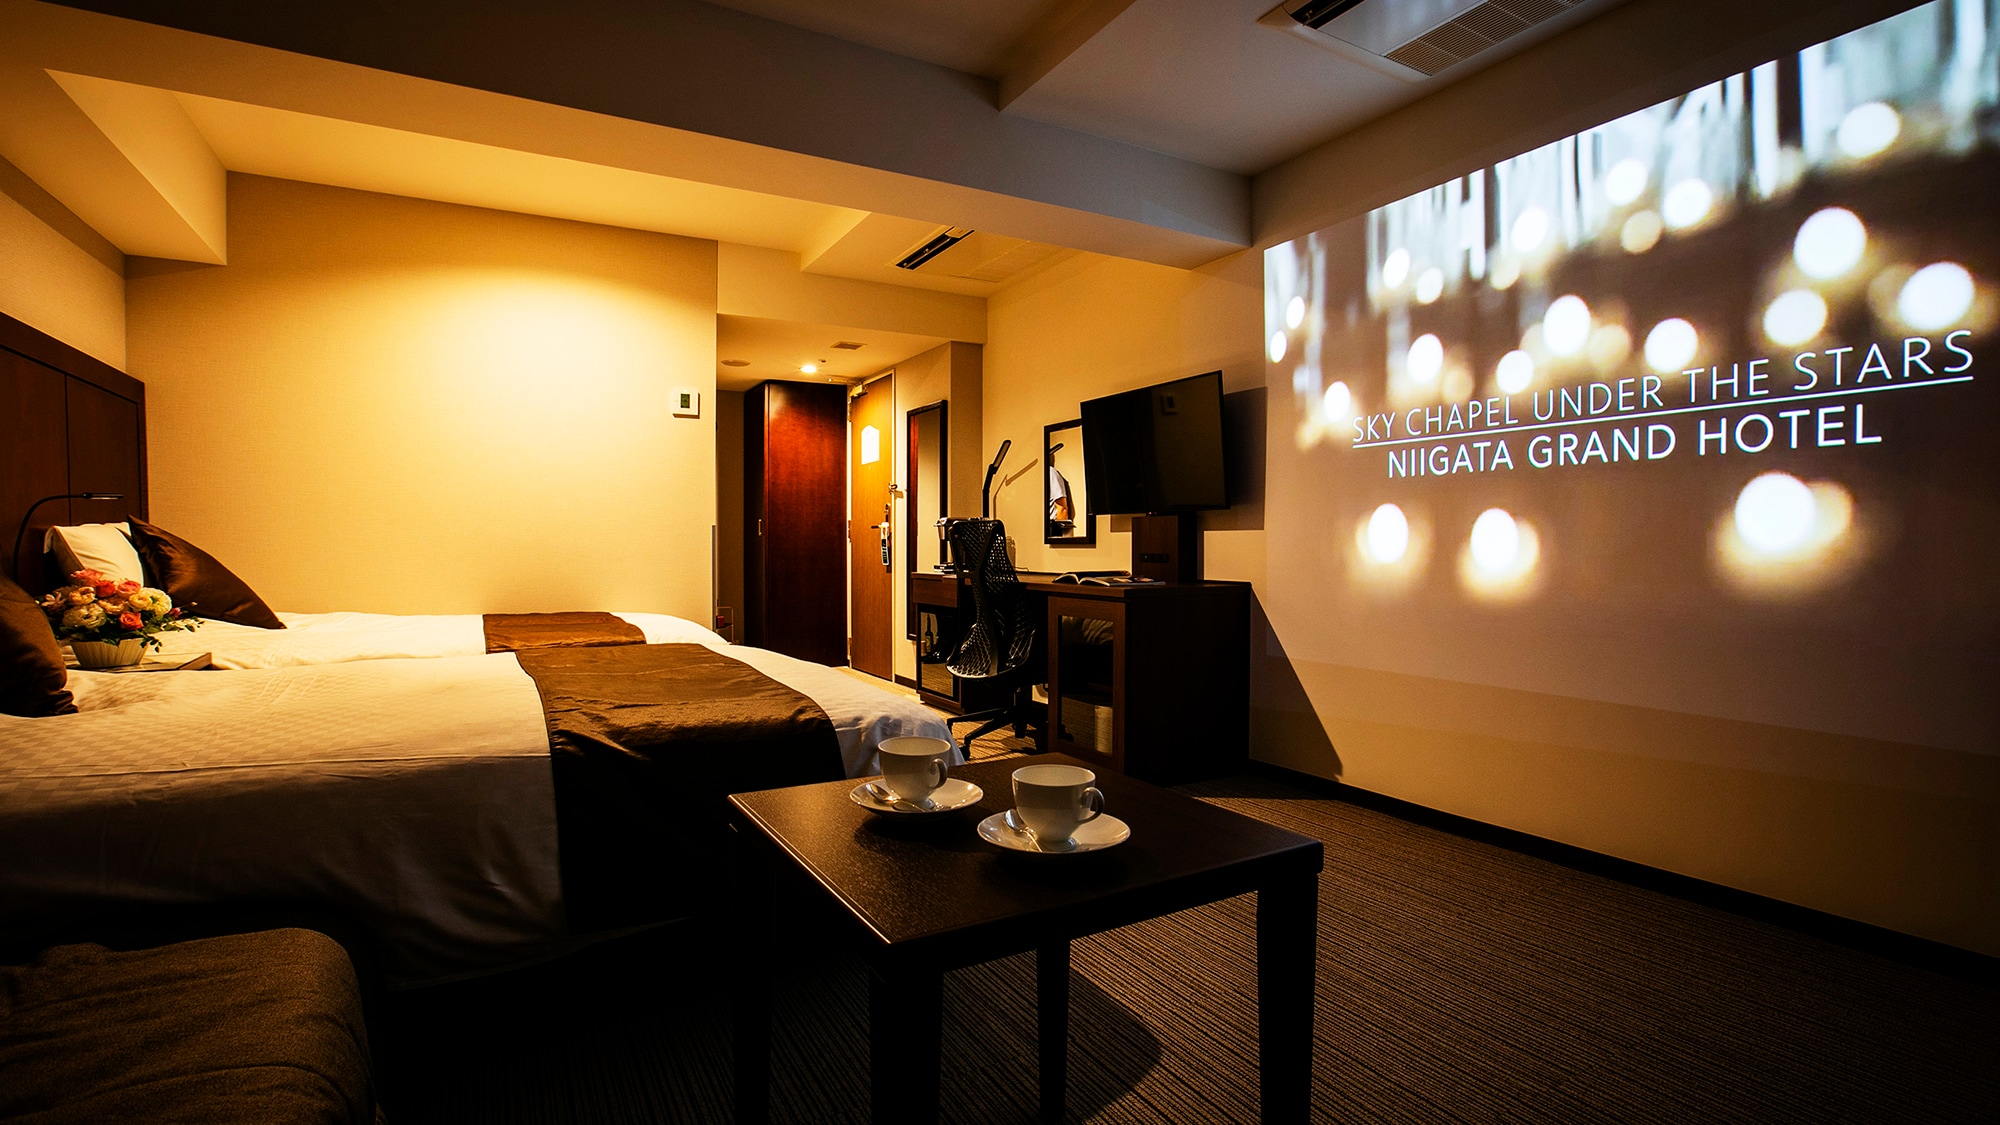 ■ New guest room - Room Theater Twin: Non-smoking ■ (27 square meters)